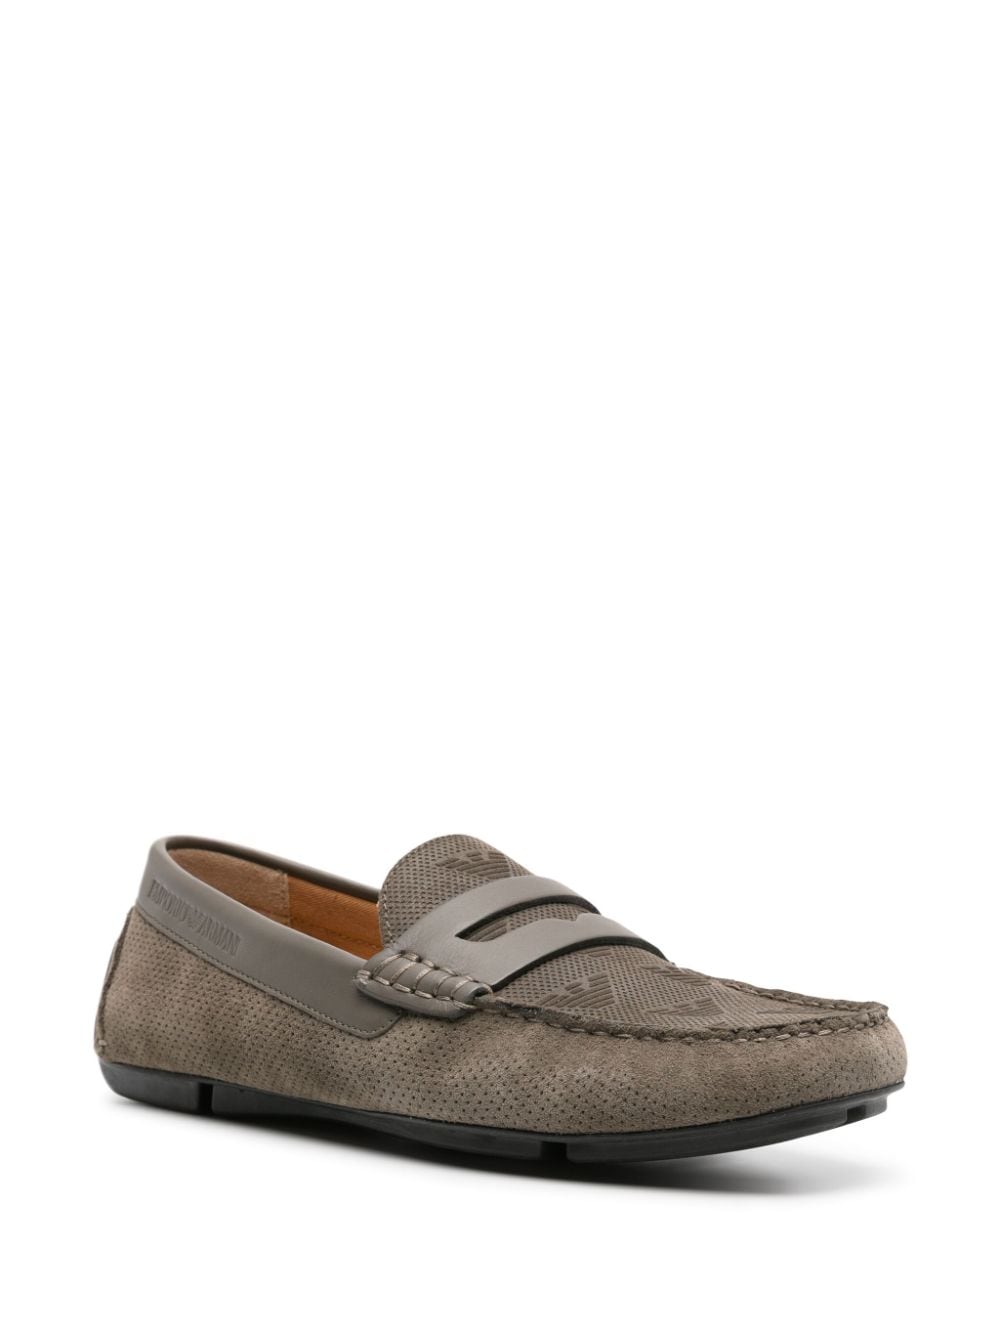 Emporio Armani perforated suede loafers - Groen